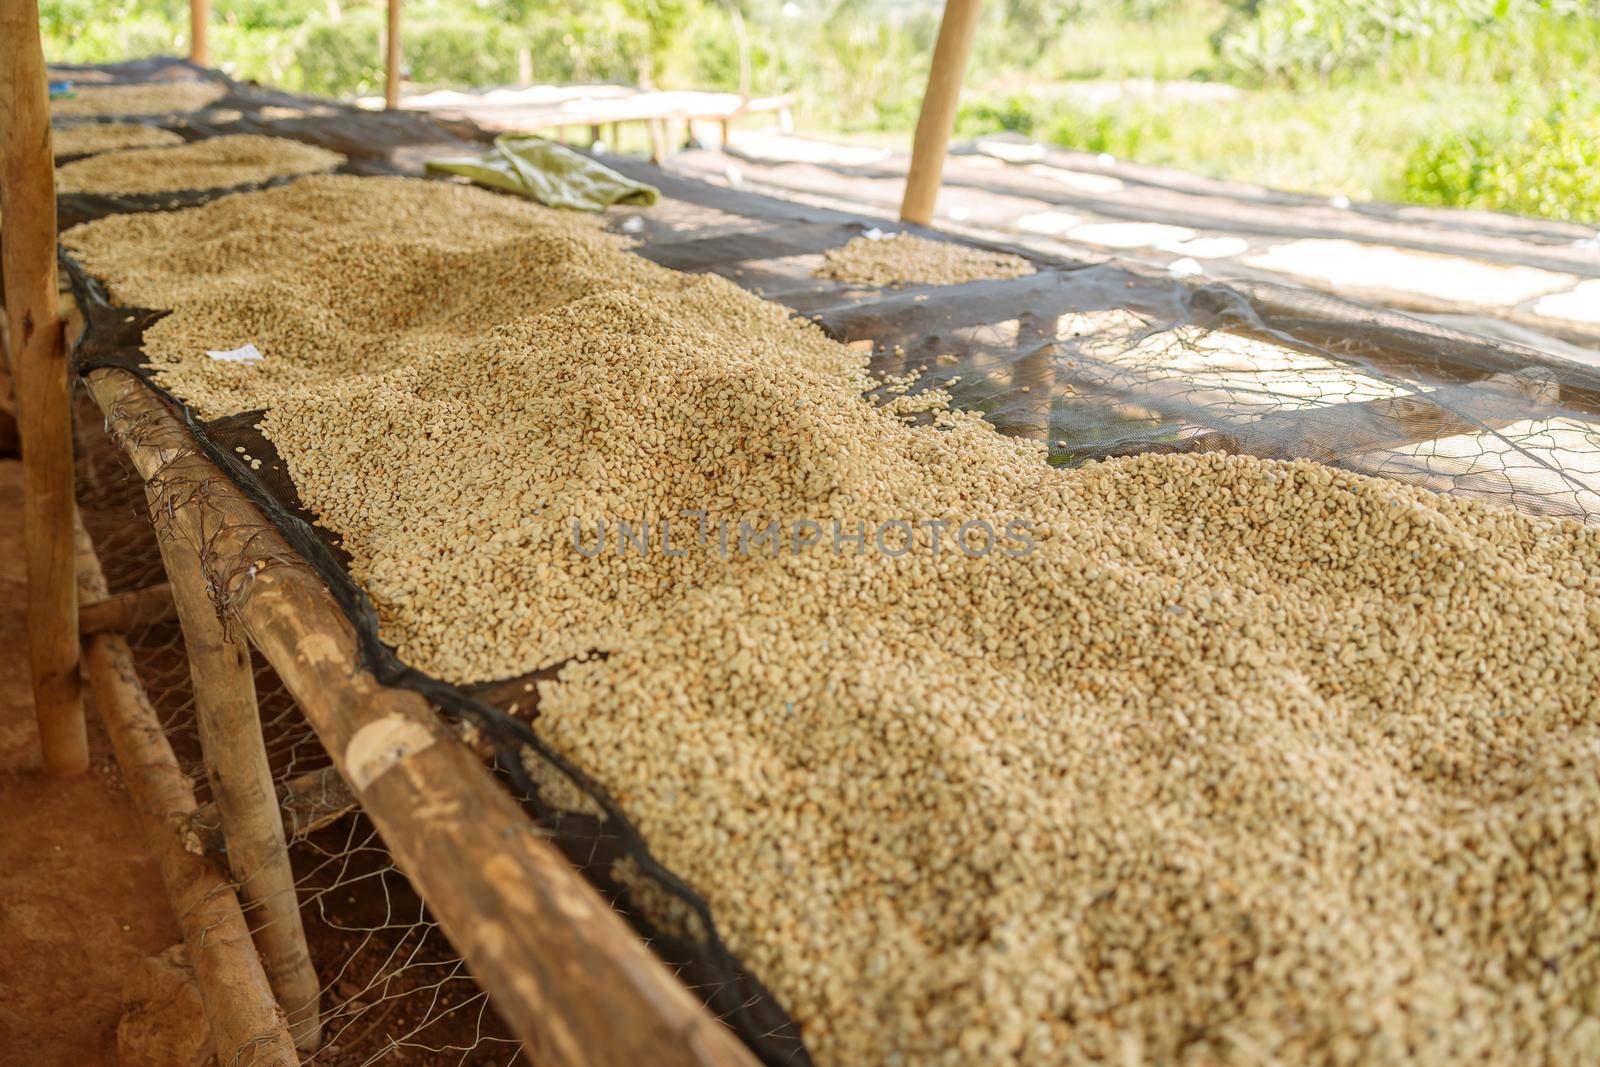 Coffee natural drying process at washing station on coffee farm in South Africa